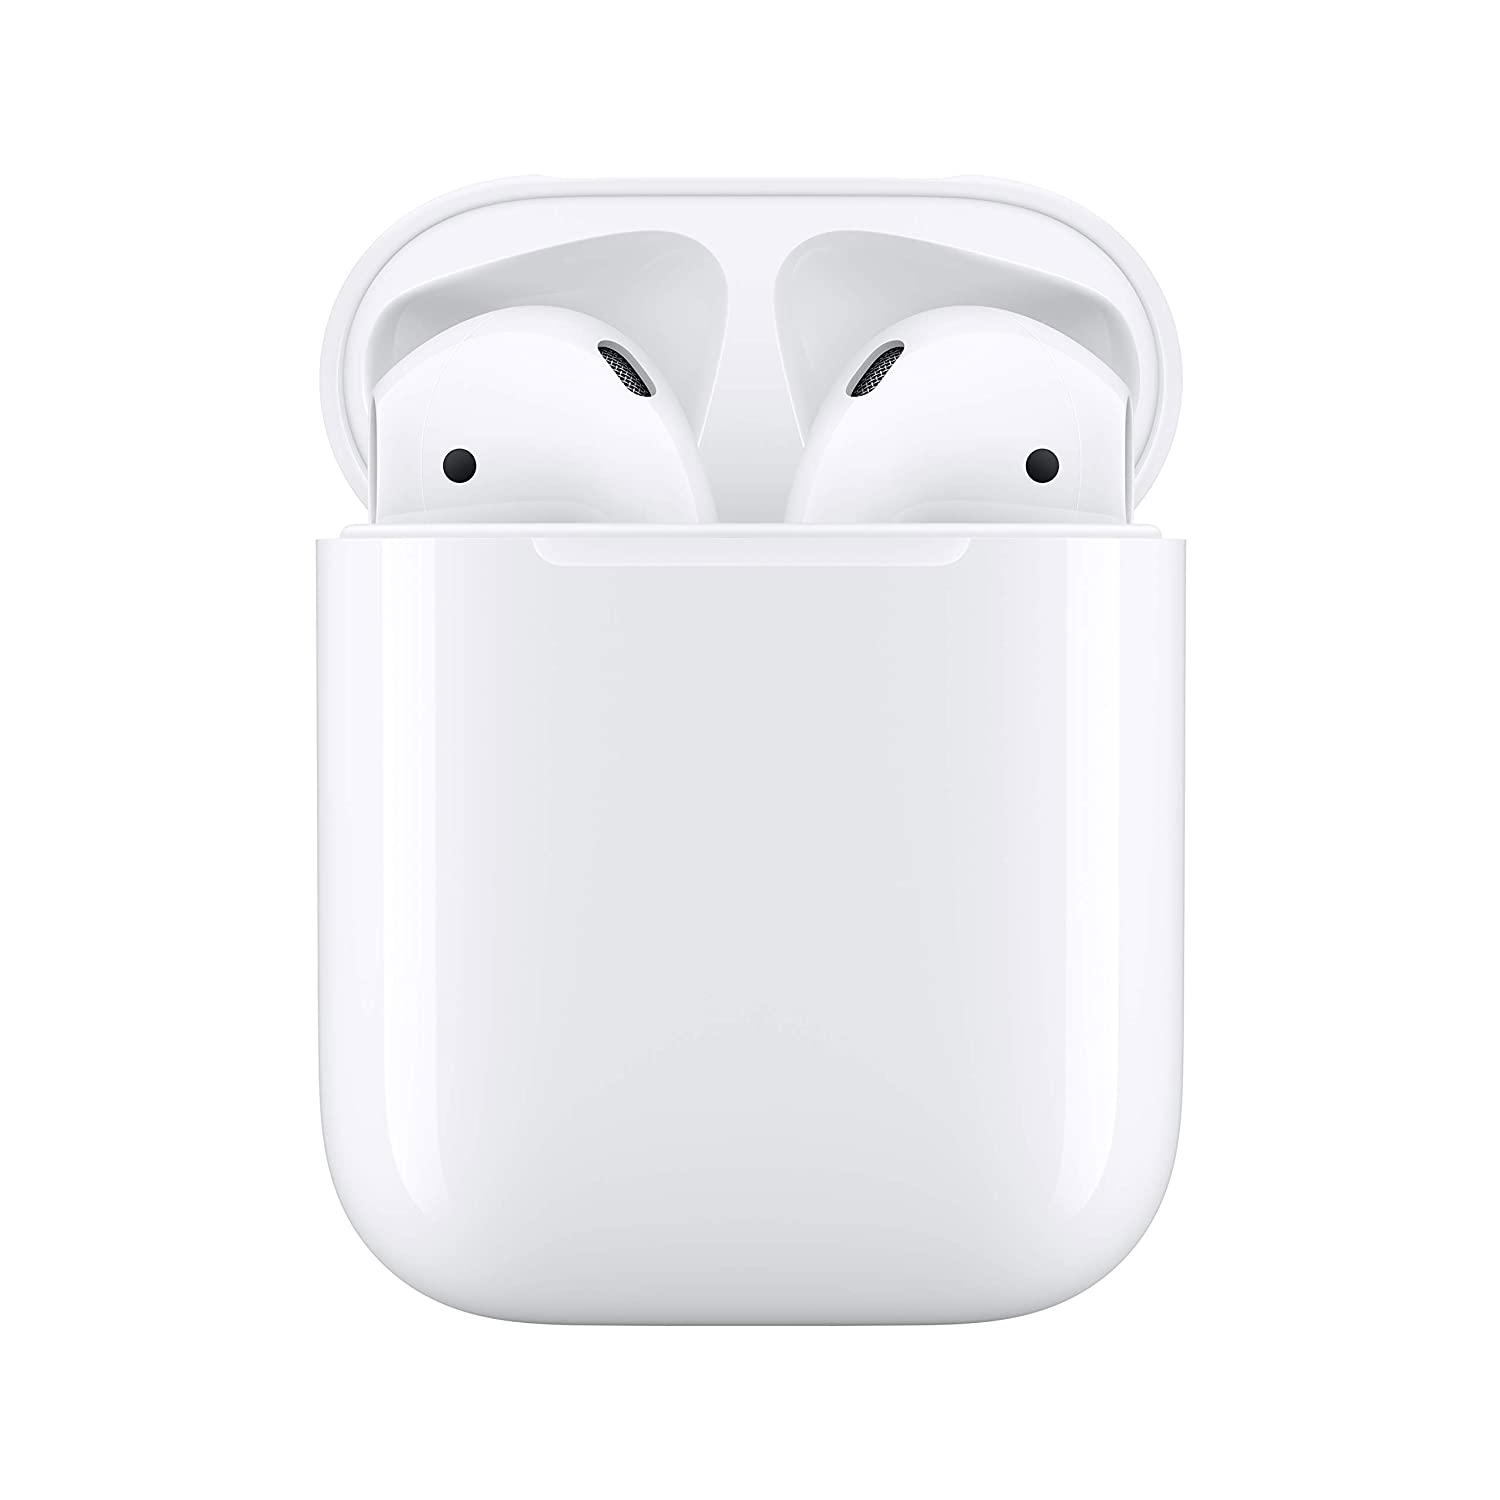 AirPods 2 with H1 chip